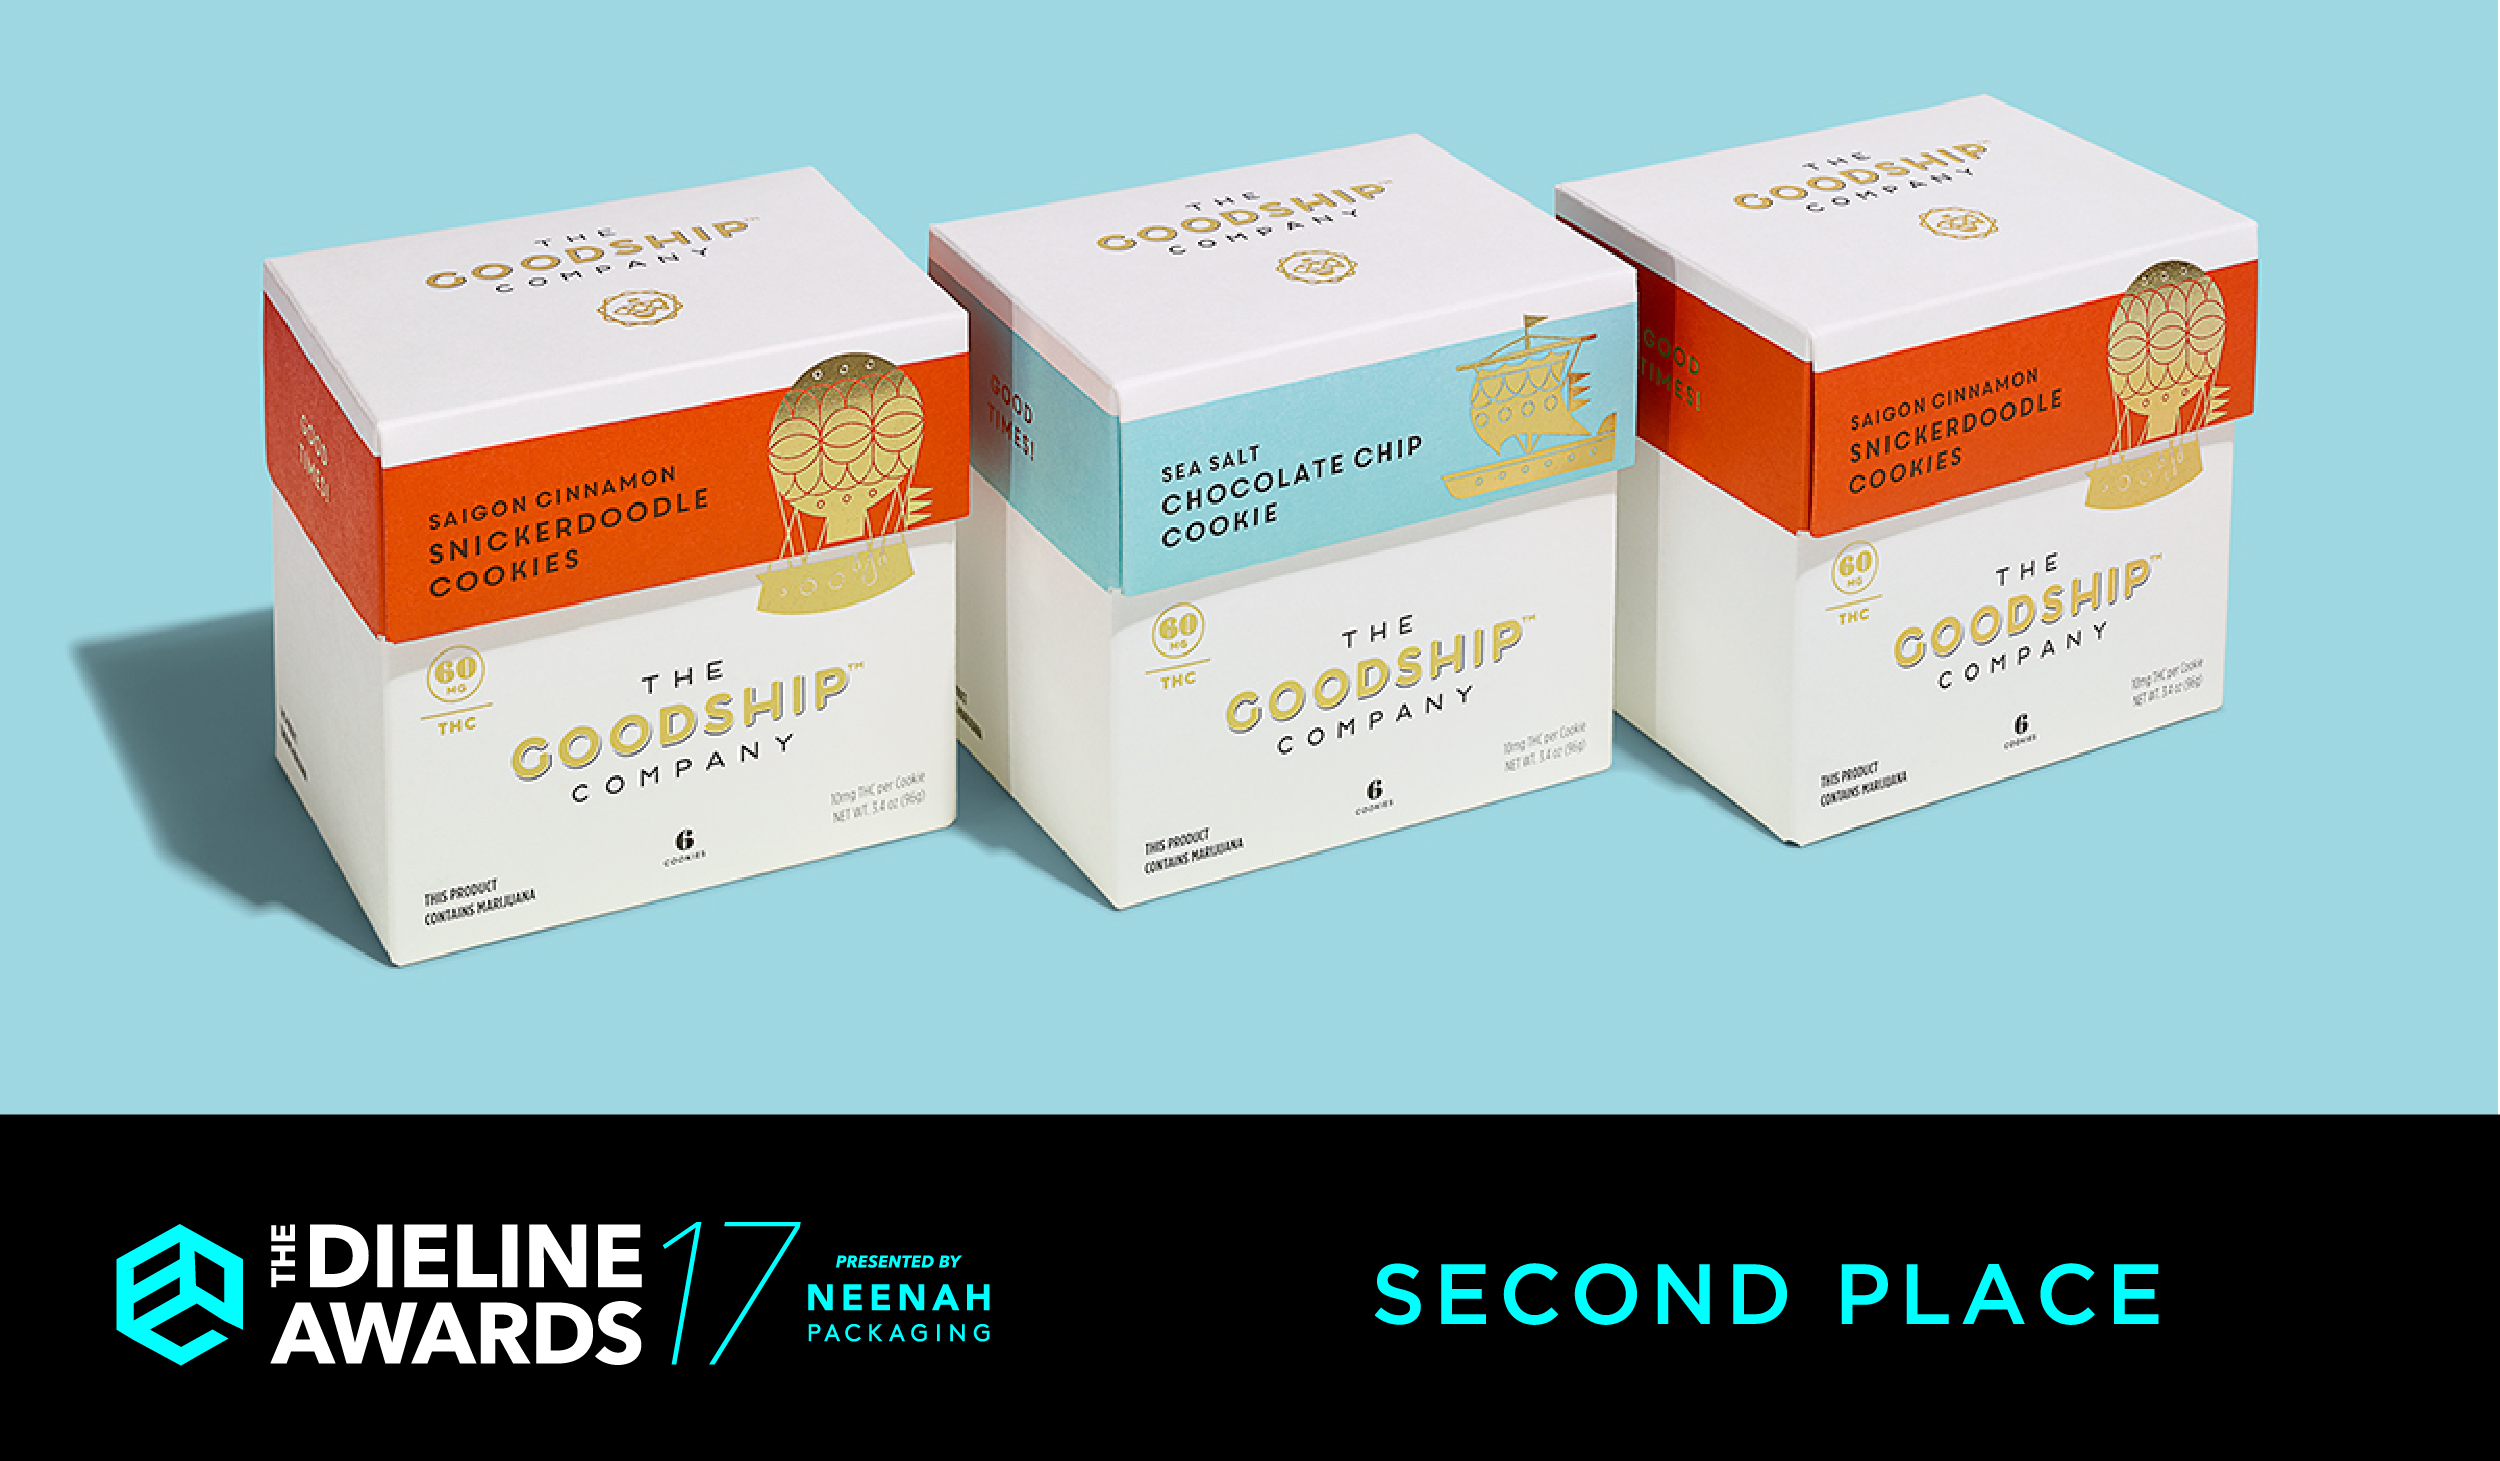 The Dieline Awards 2017: The Goodship Company